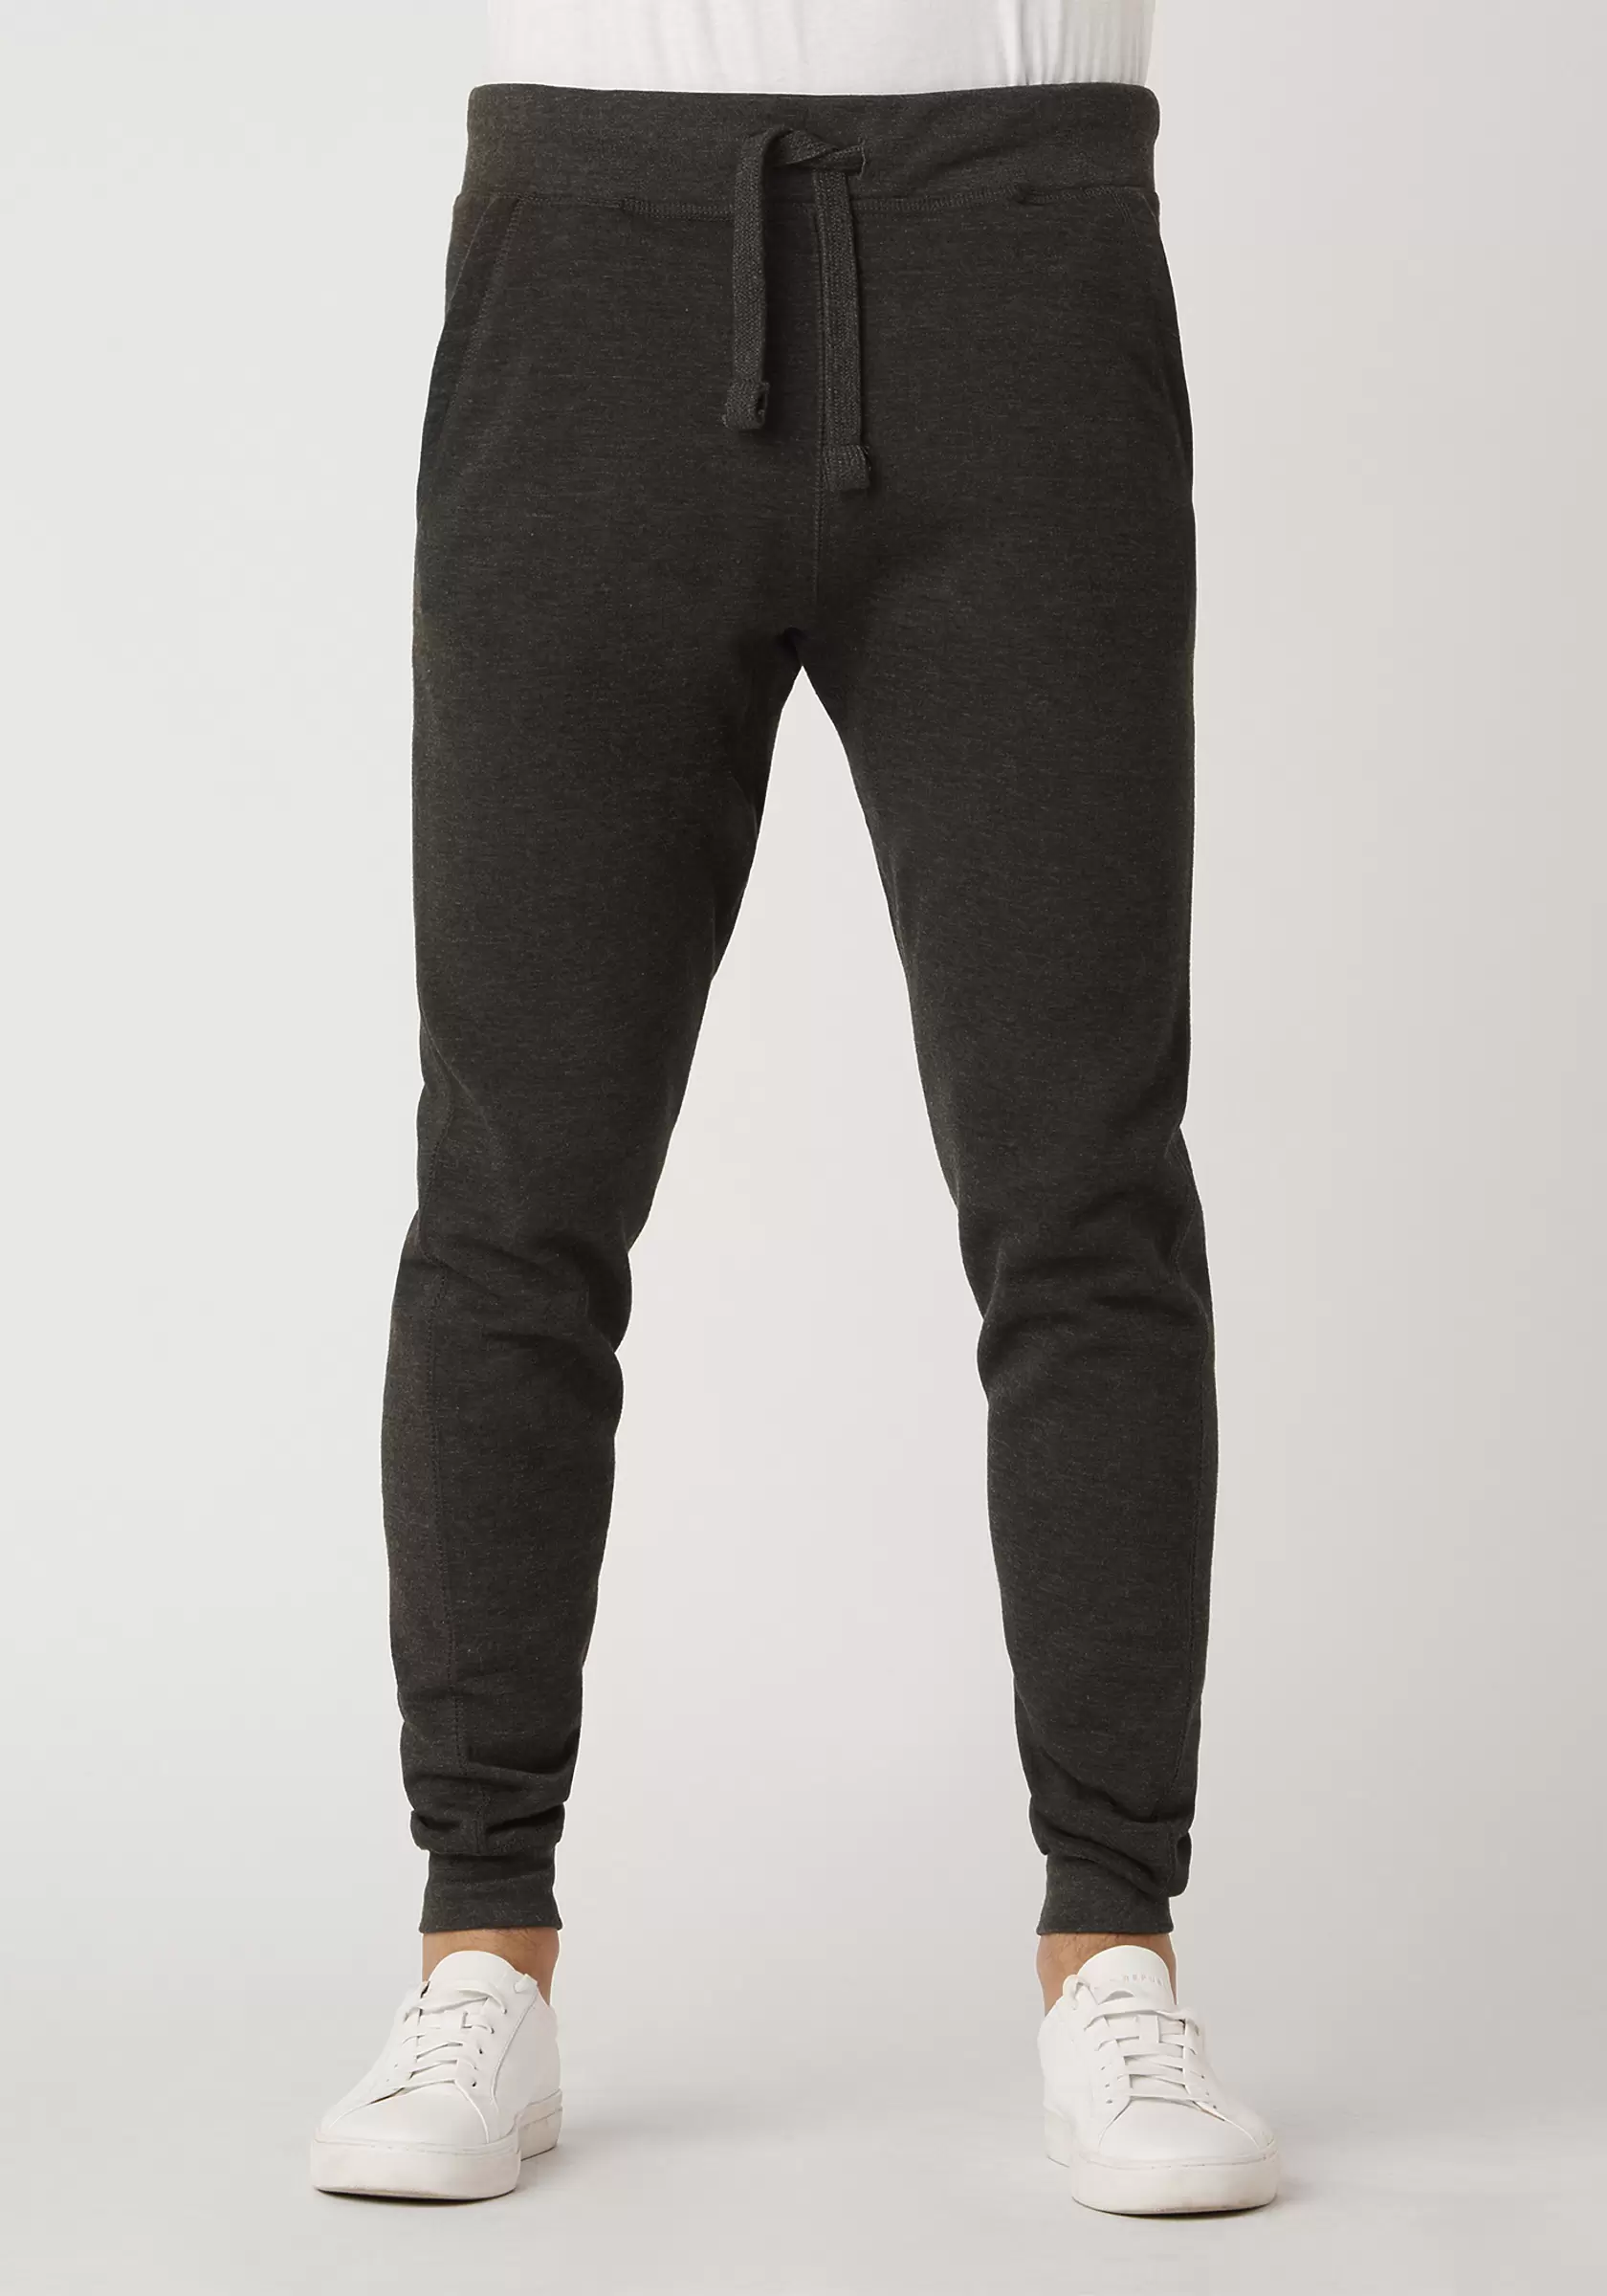 Cotton Heritage M7580 PREMIUM JOGGER Pants - From $16.07